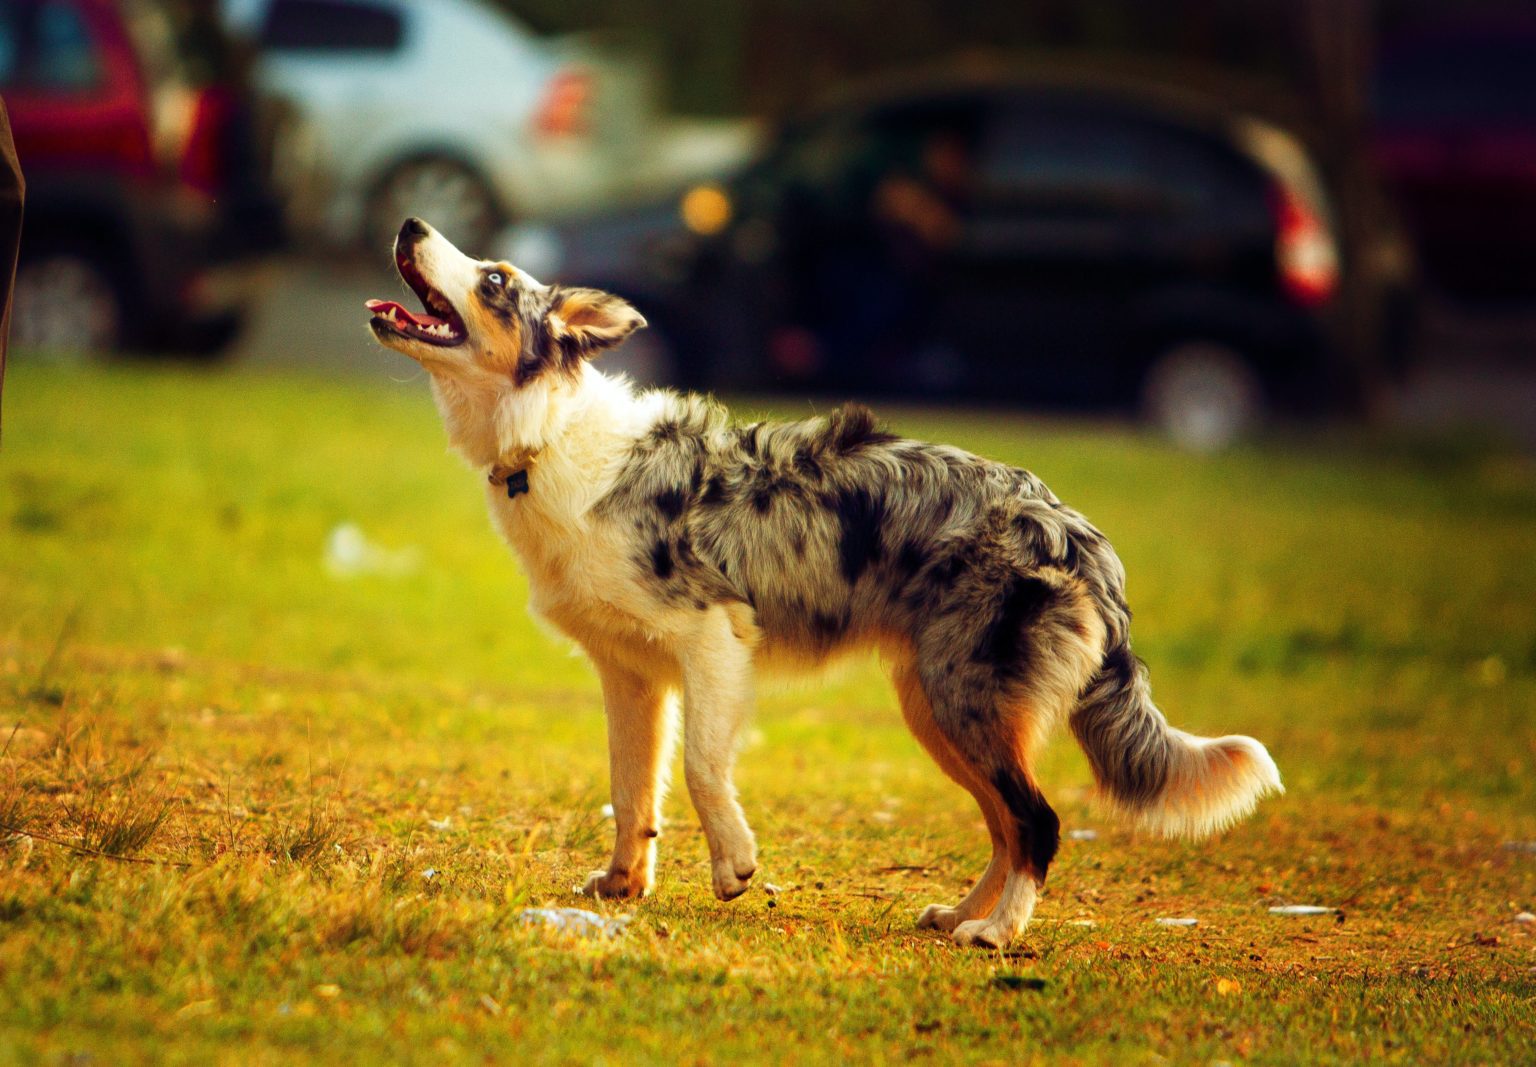 The Australian Shepherd probably came from the Basque region of Spain. Basque shepherds first took their dogs with them to Australia and then to the United States, so Americans called the dogs Australian Shepherds. The breed, as we know it today, was developed solely in the United States.